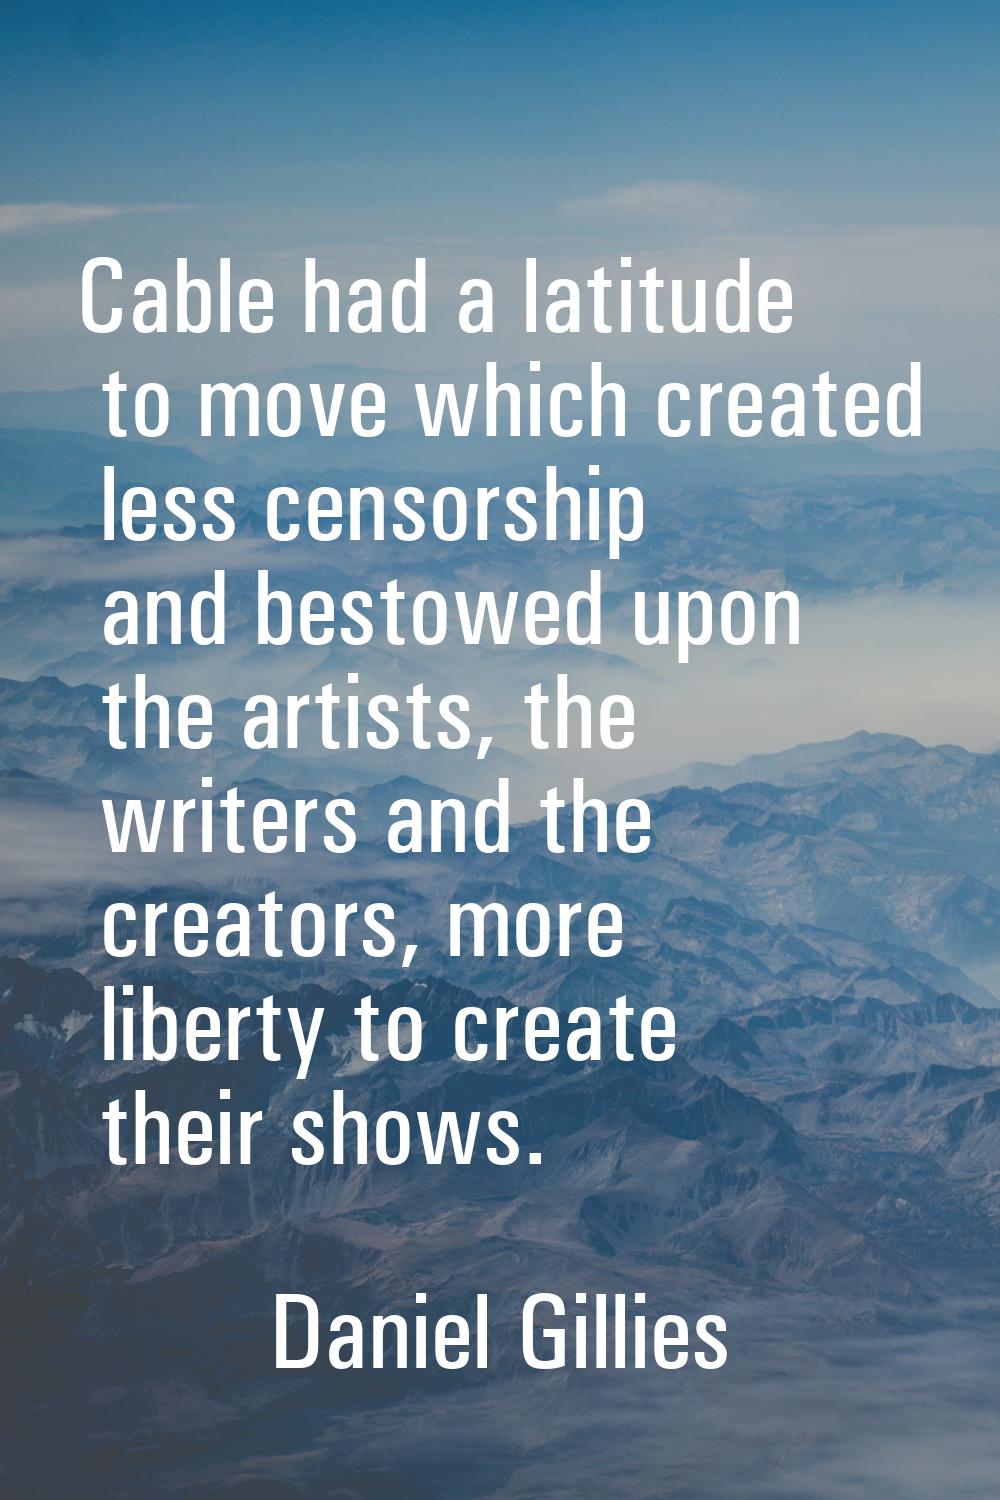 Cable had a latitude to move which created less censorship and bestowed upon the artists, the write